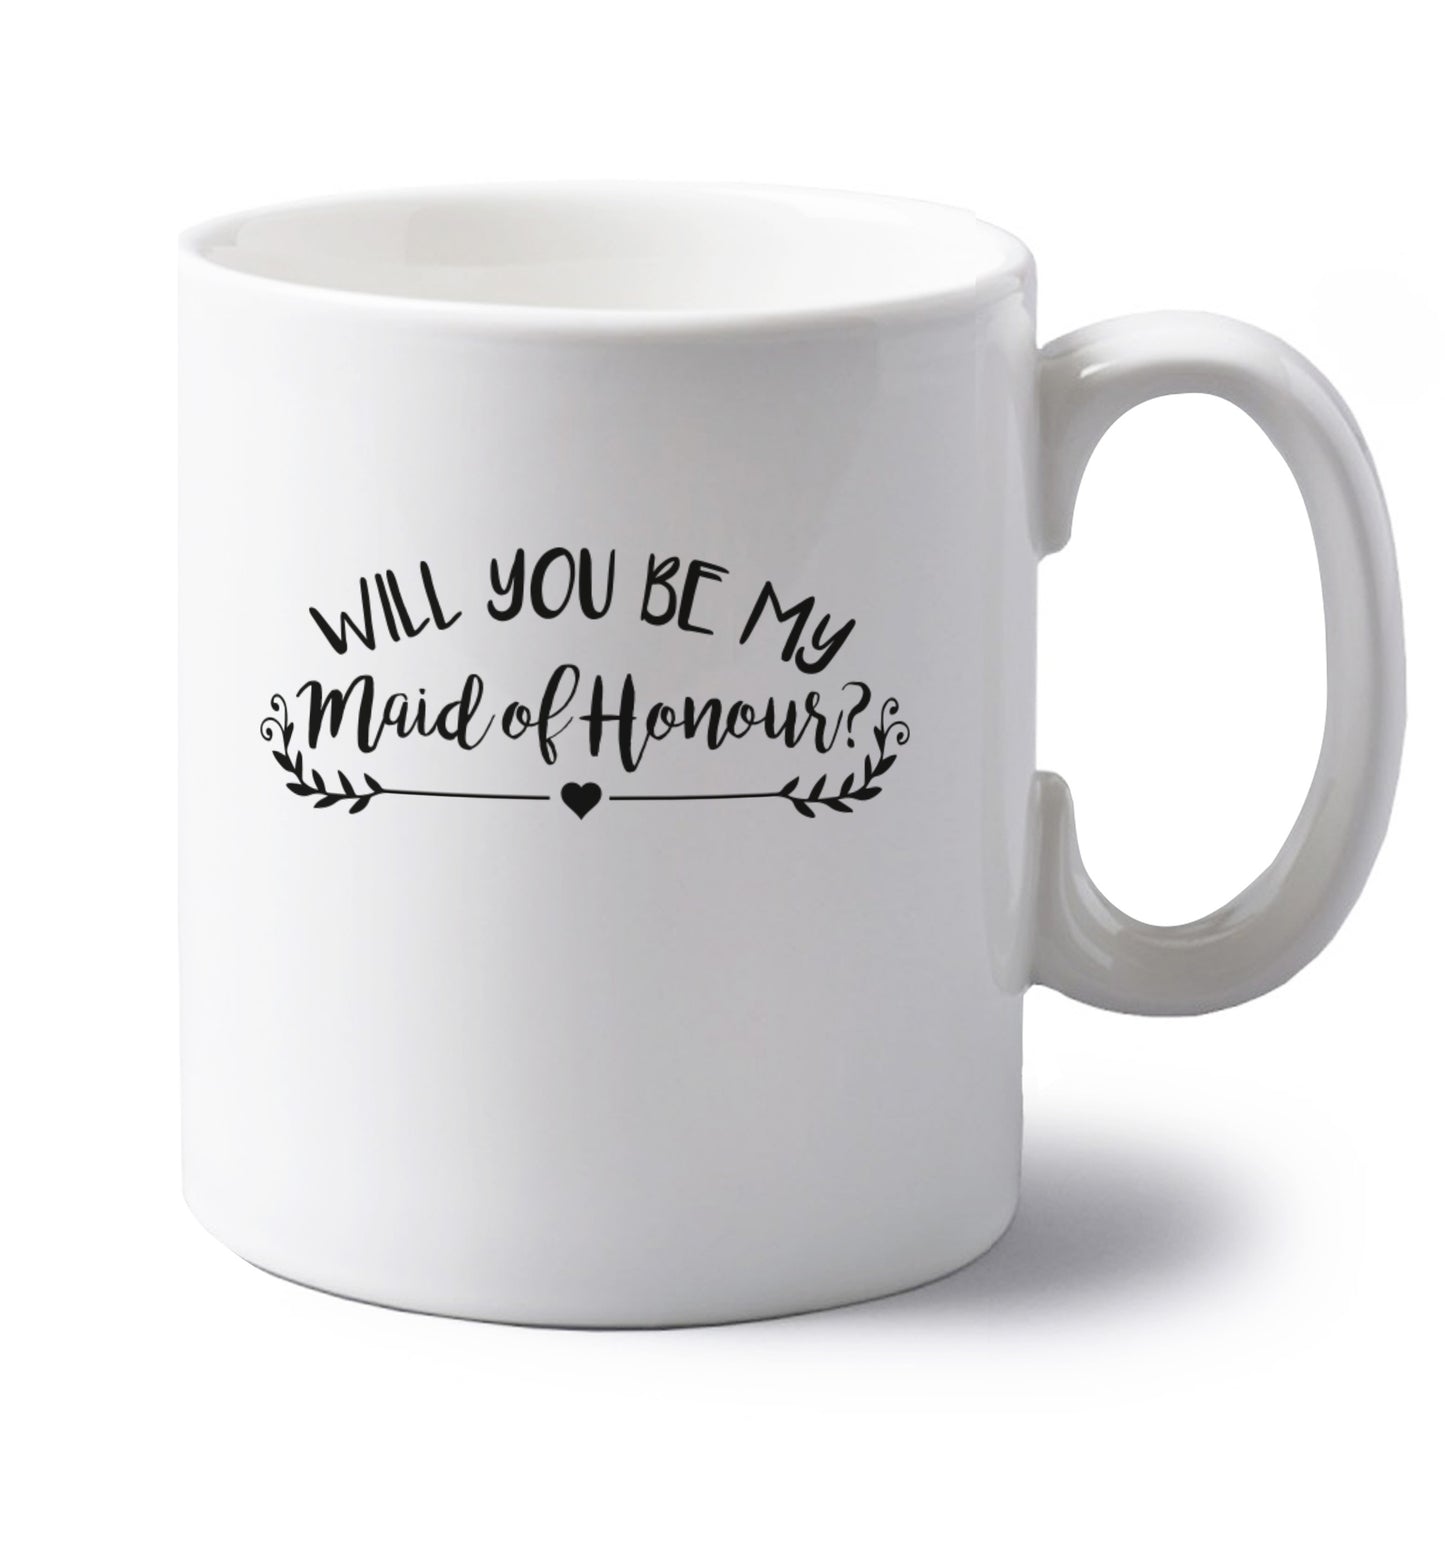 Will you be my maid of honour? left handed white ceramic mug 